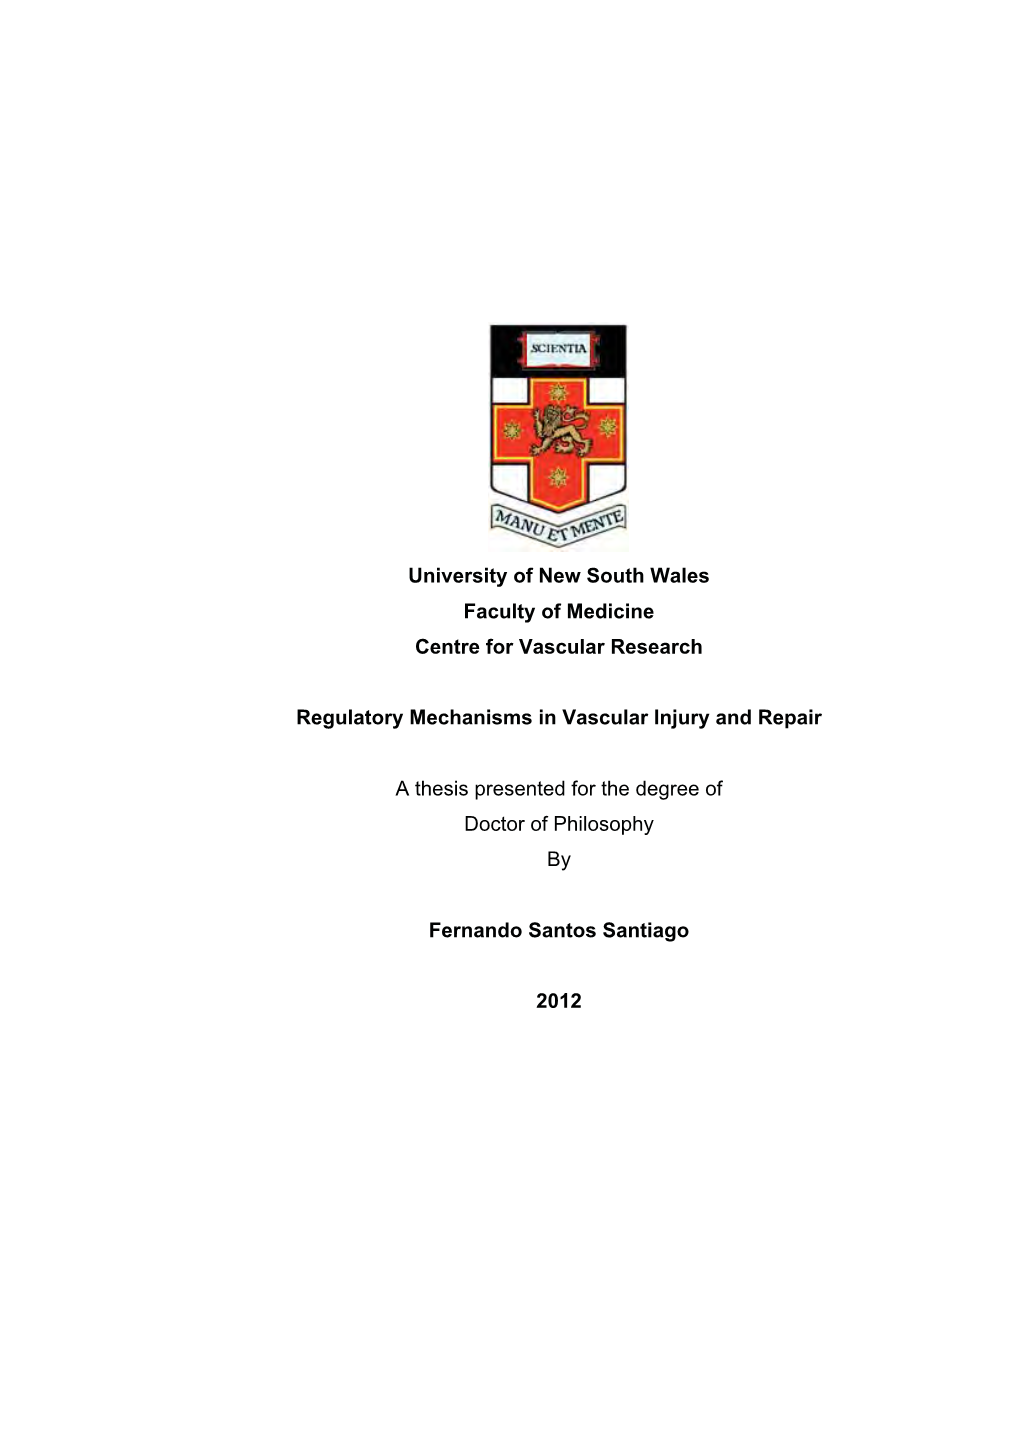 University of New South Wales Faculty of Medicine Centre for Vascular Research Regulatory Mechanisms in Vascular Injury and Repa